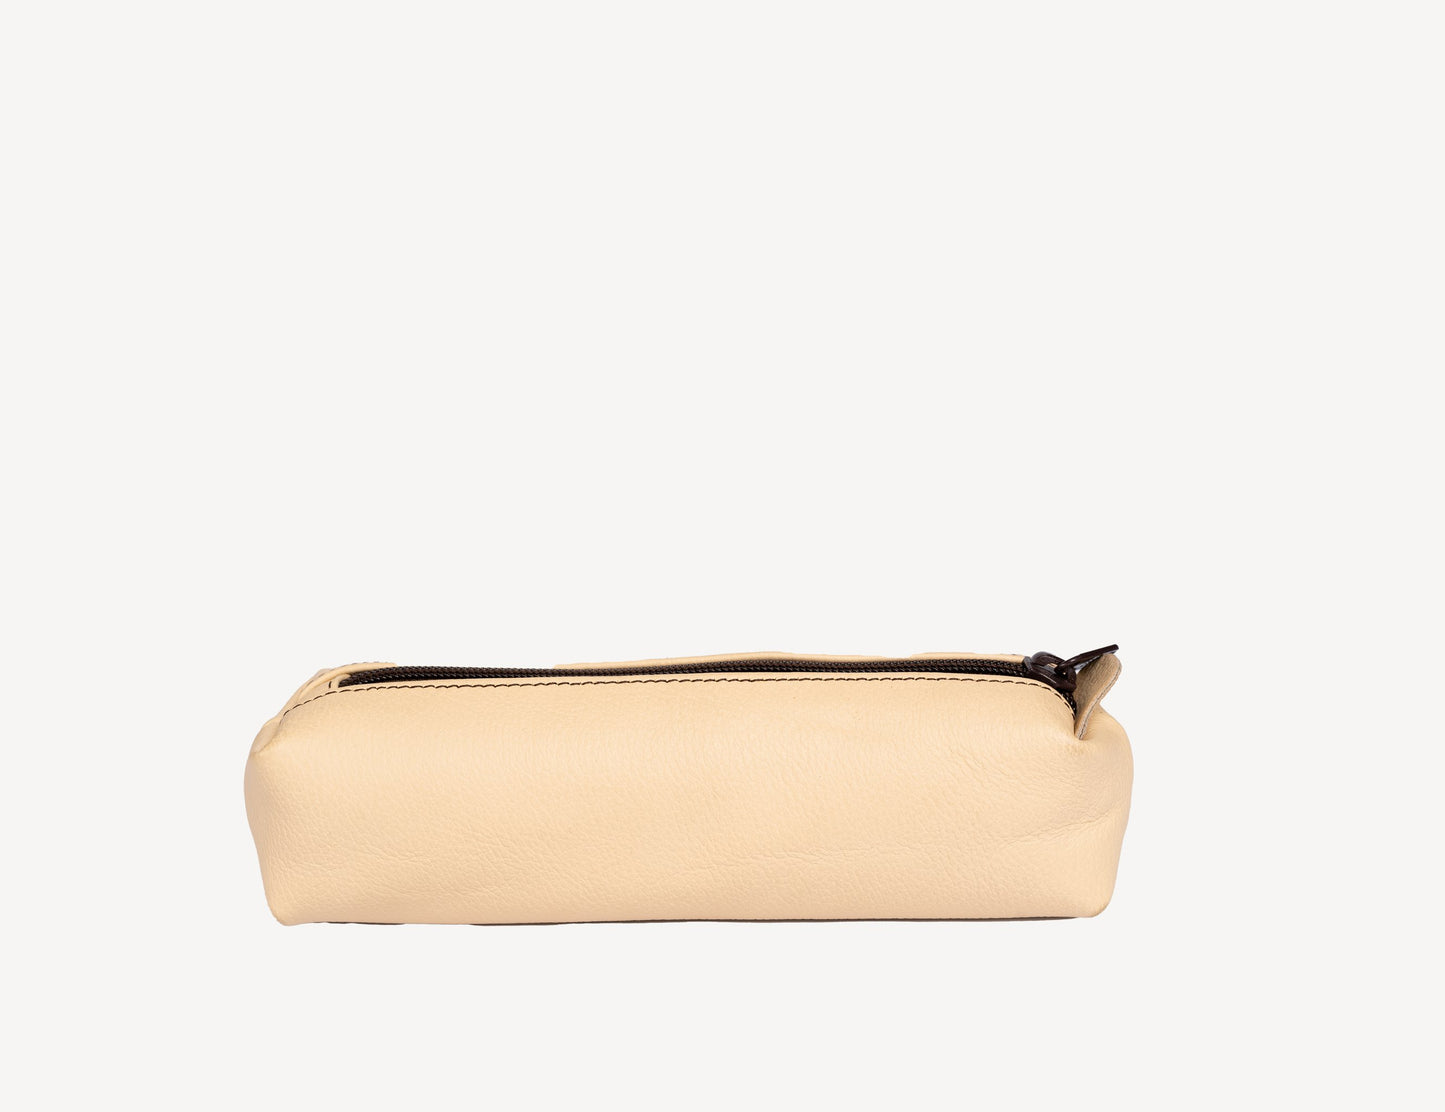 Pencil Case | Stationery Pouch | Leather Pouch | Adelphi